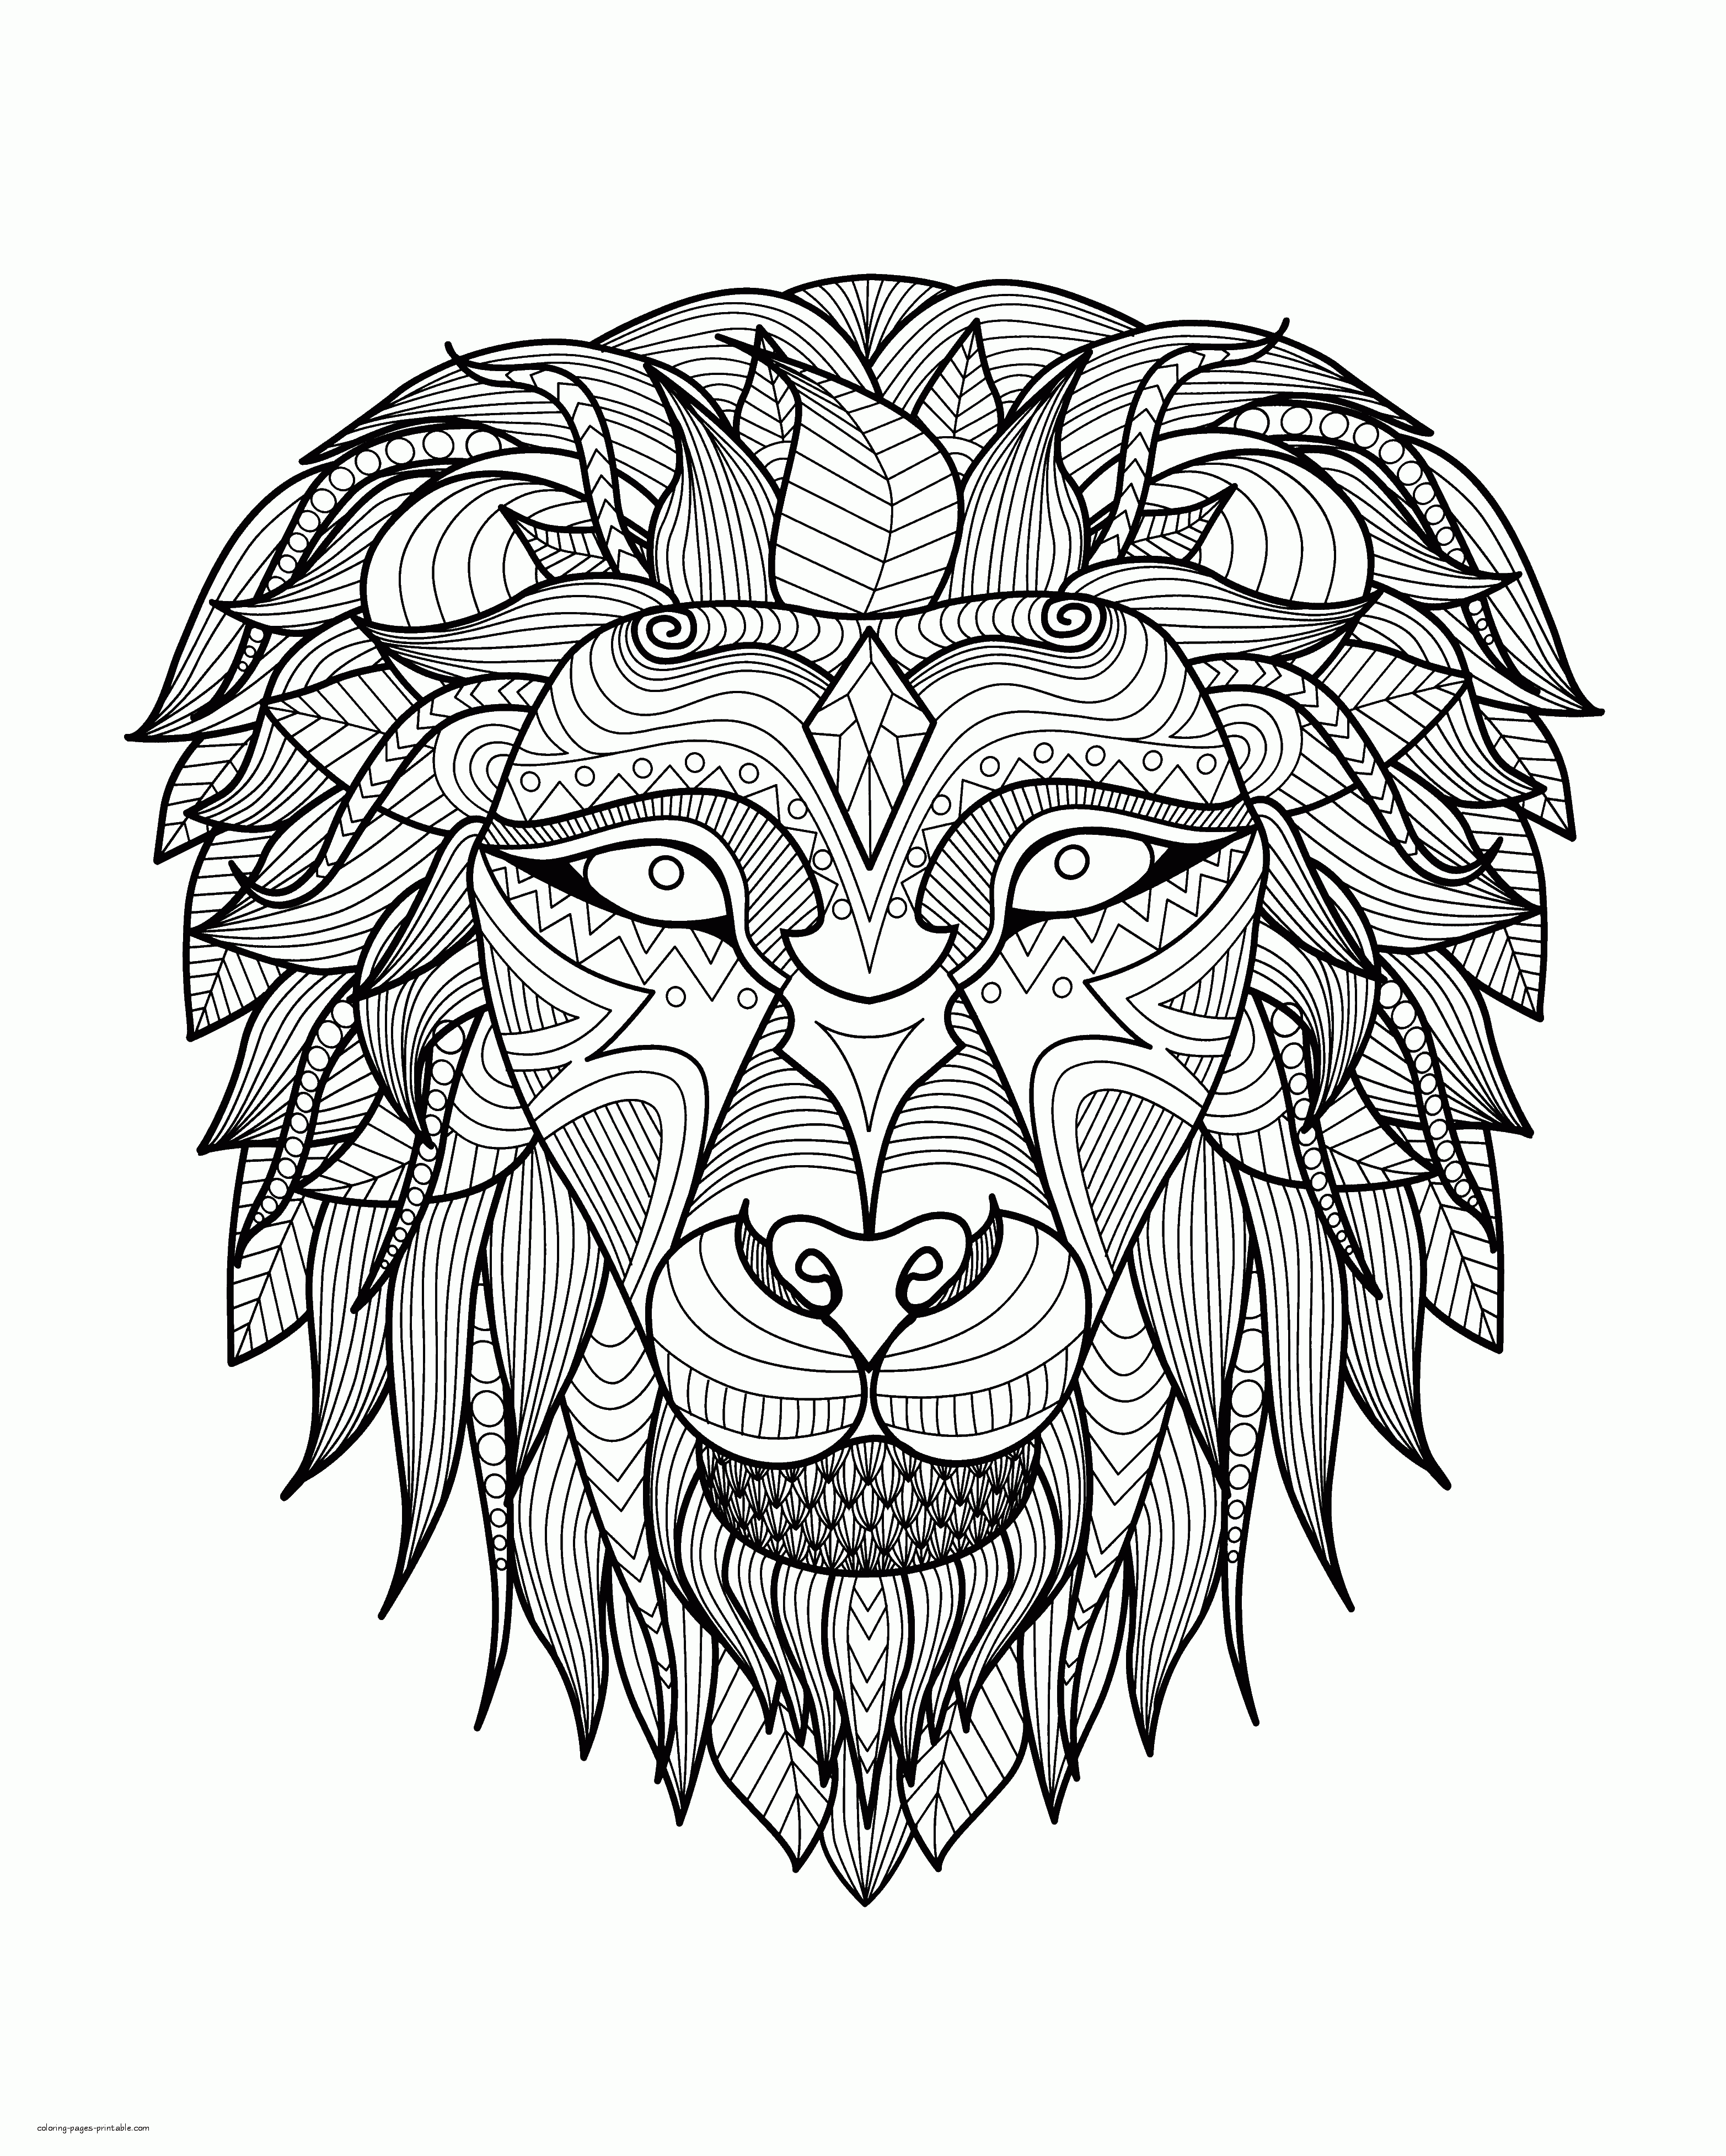 Hard Lion Coloring Page    COLORING PAGES PRINTABLE.COM